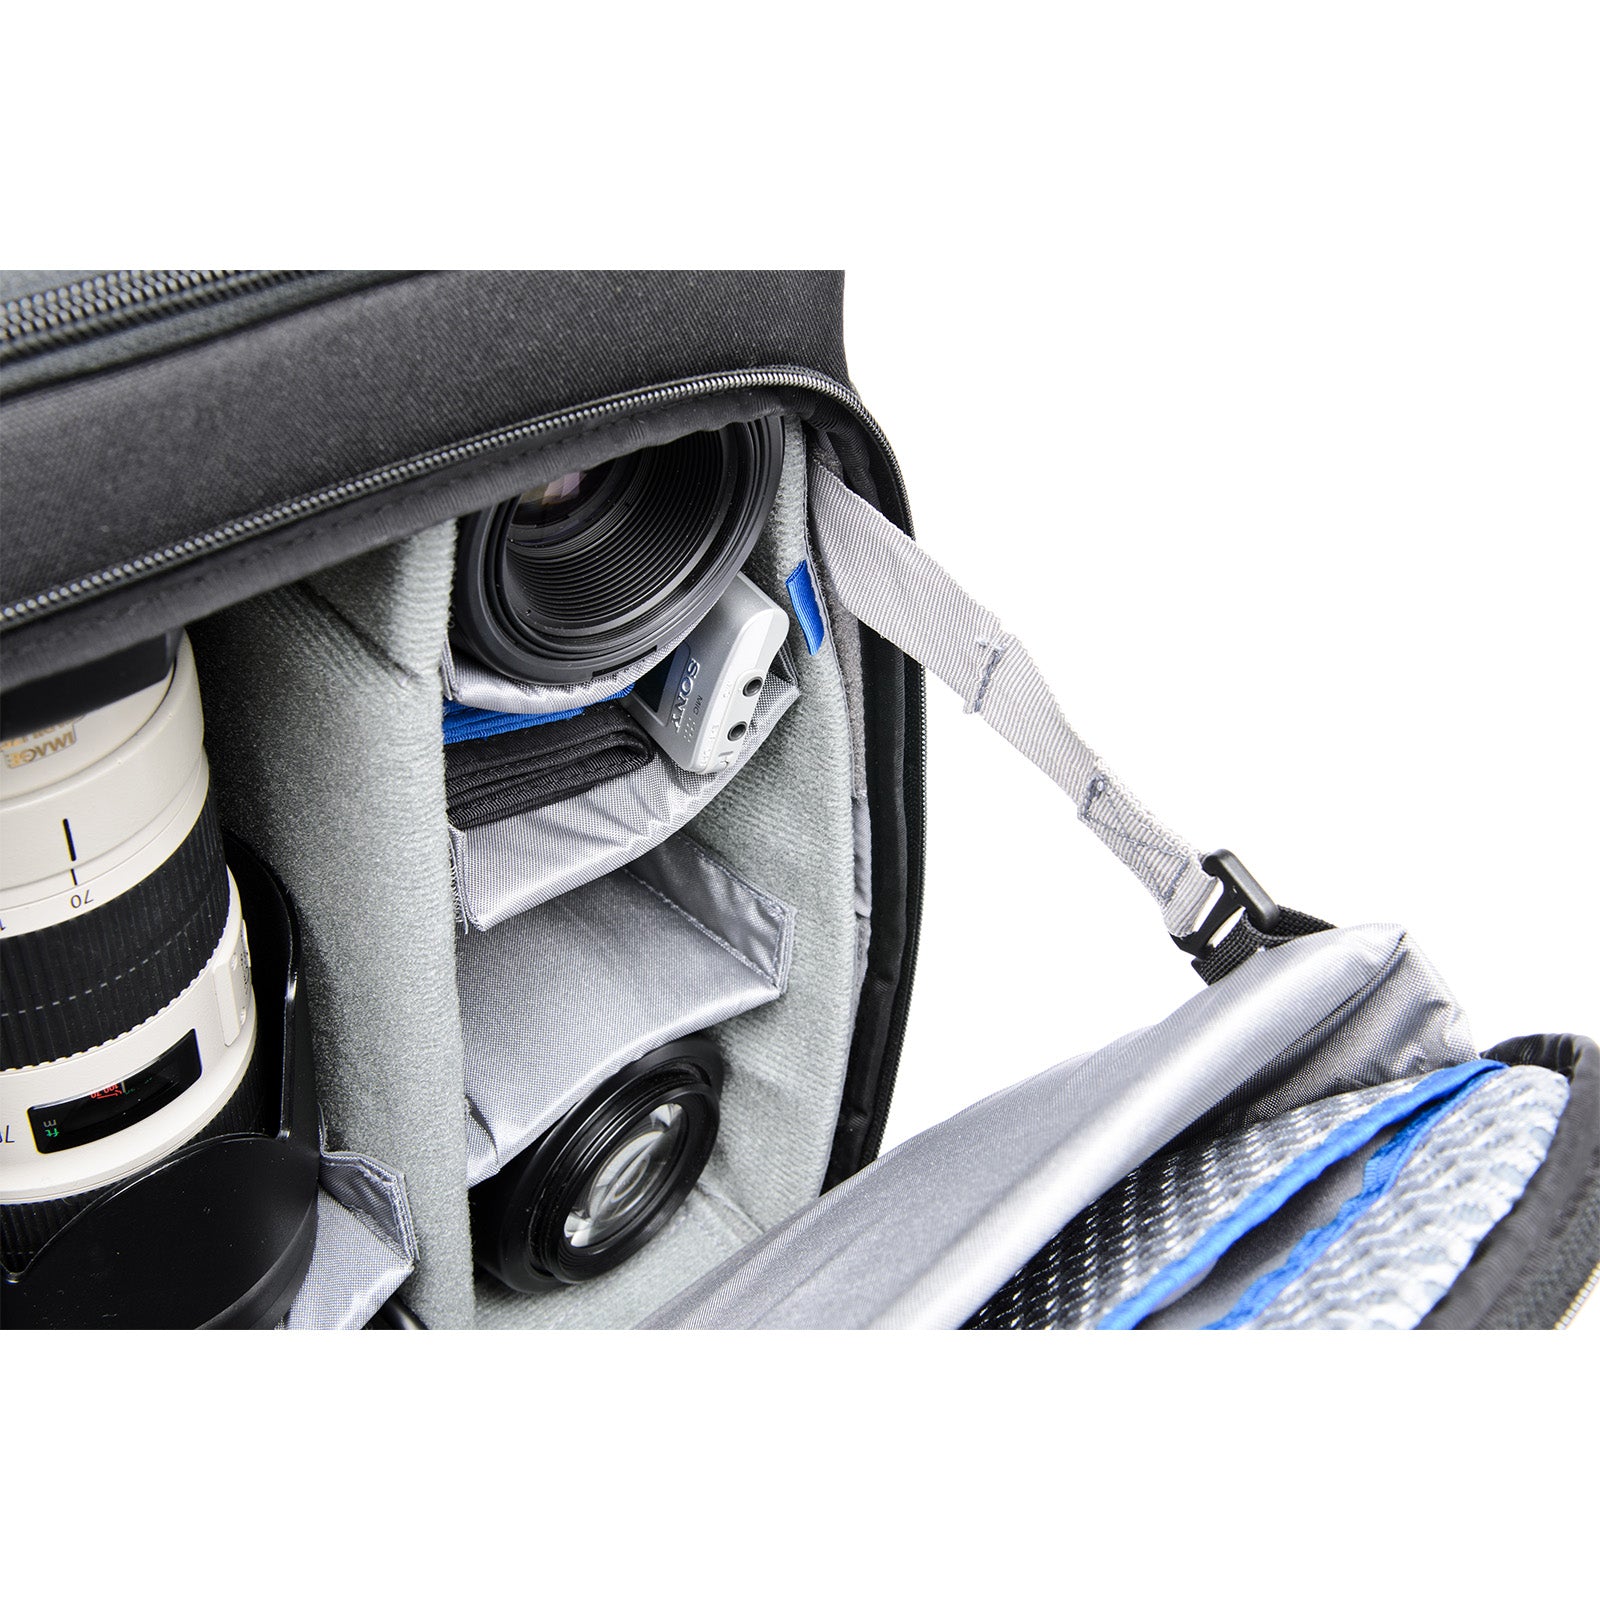 Front panel safety straps keep gear secure when on the move. Can be disconnected for better gear access